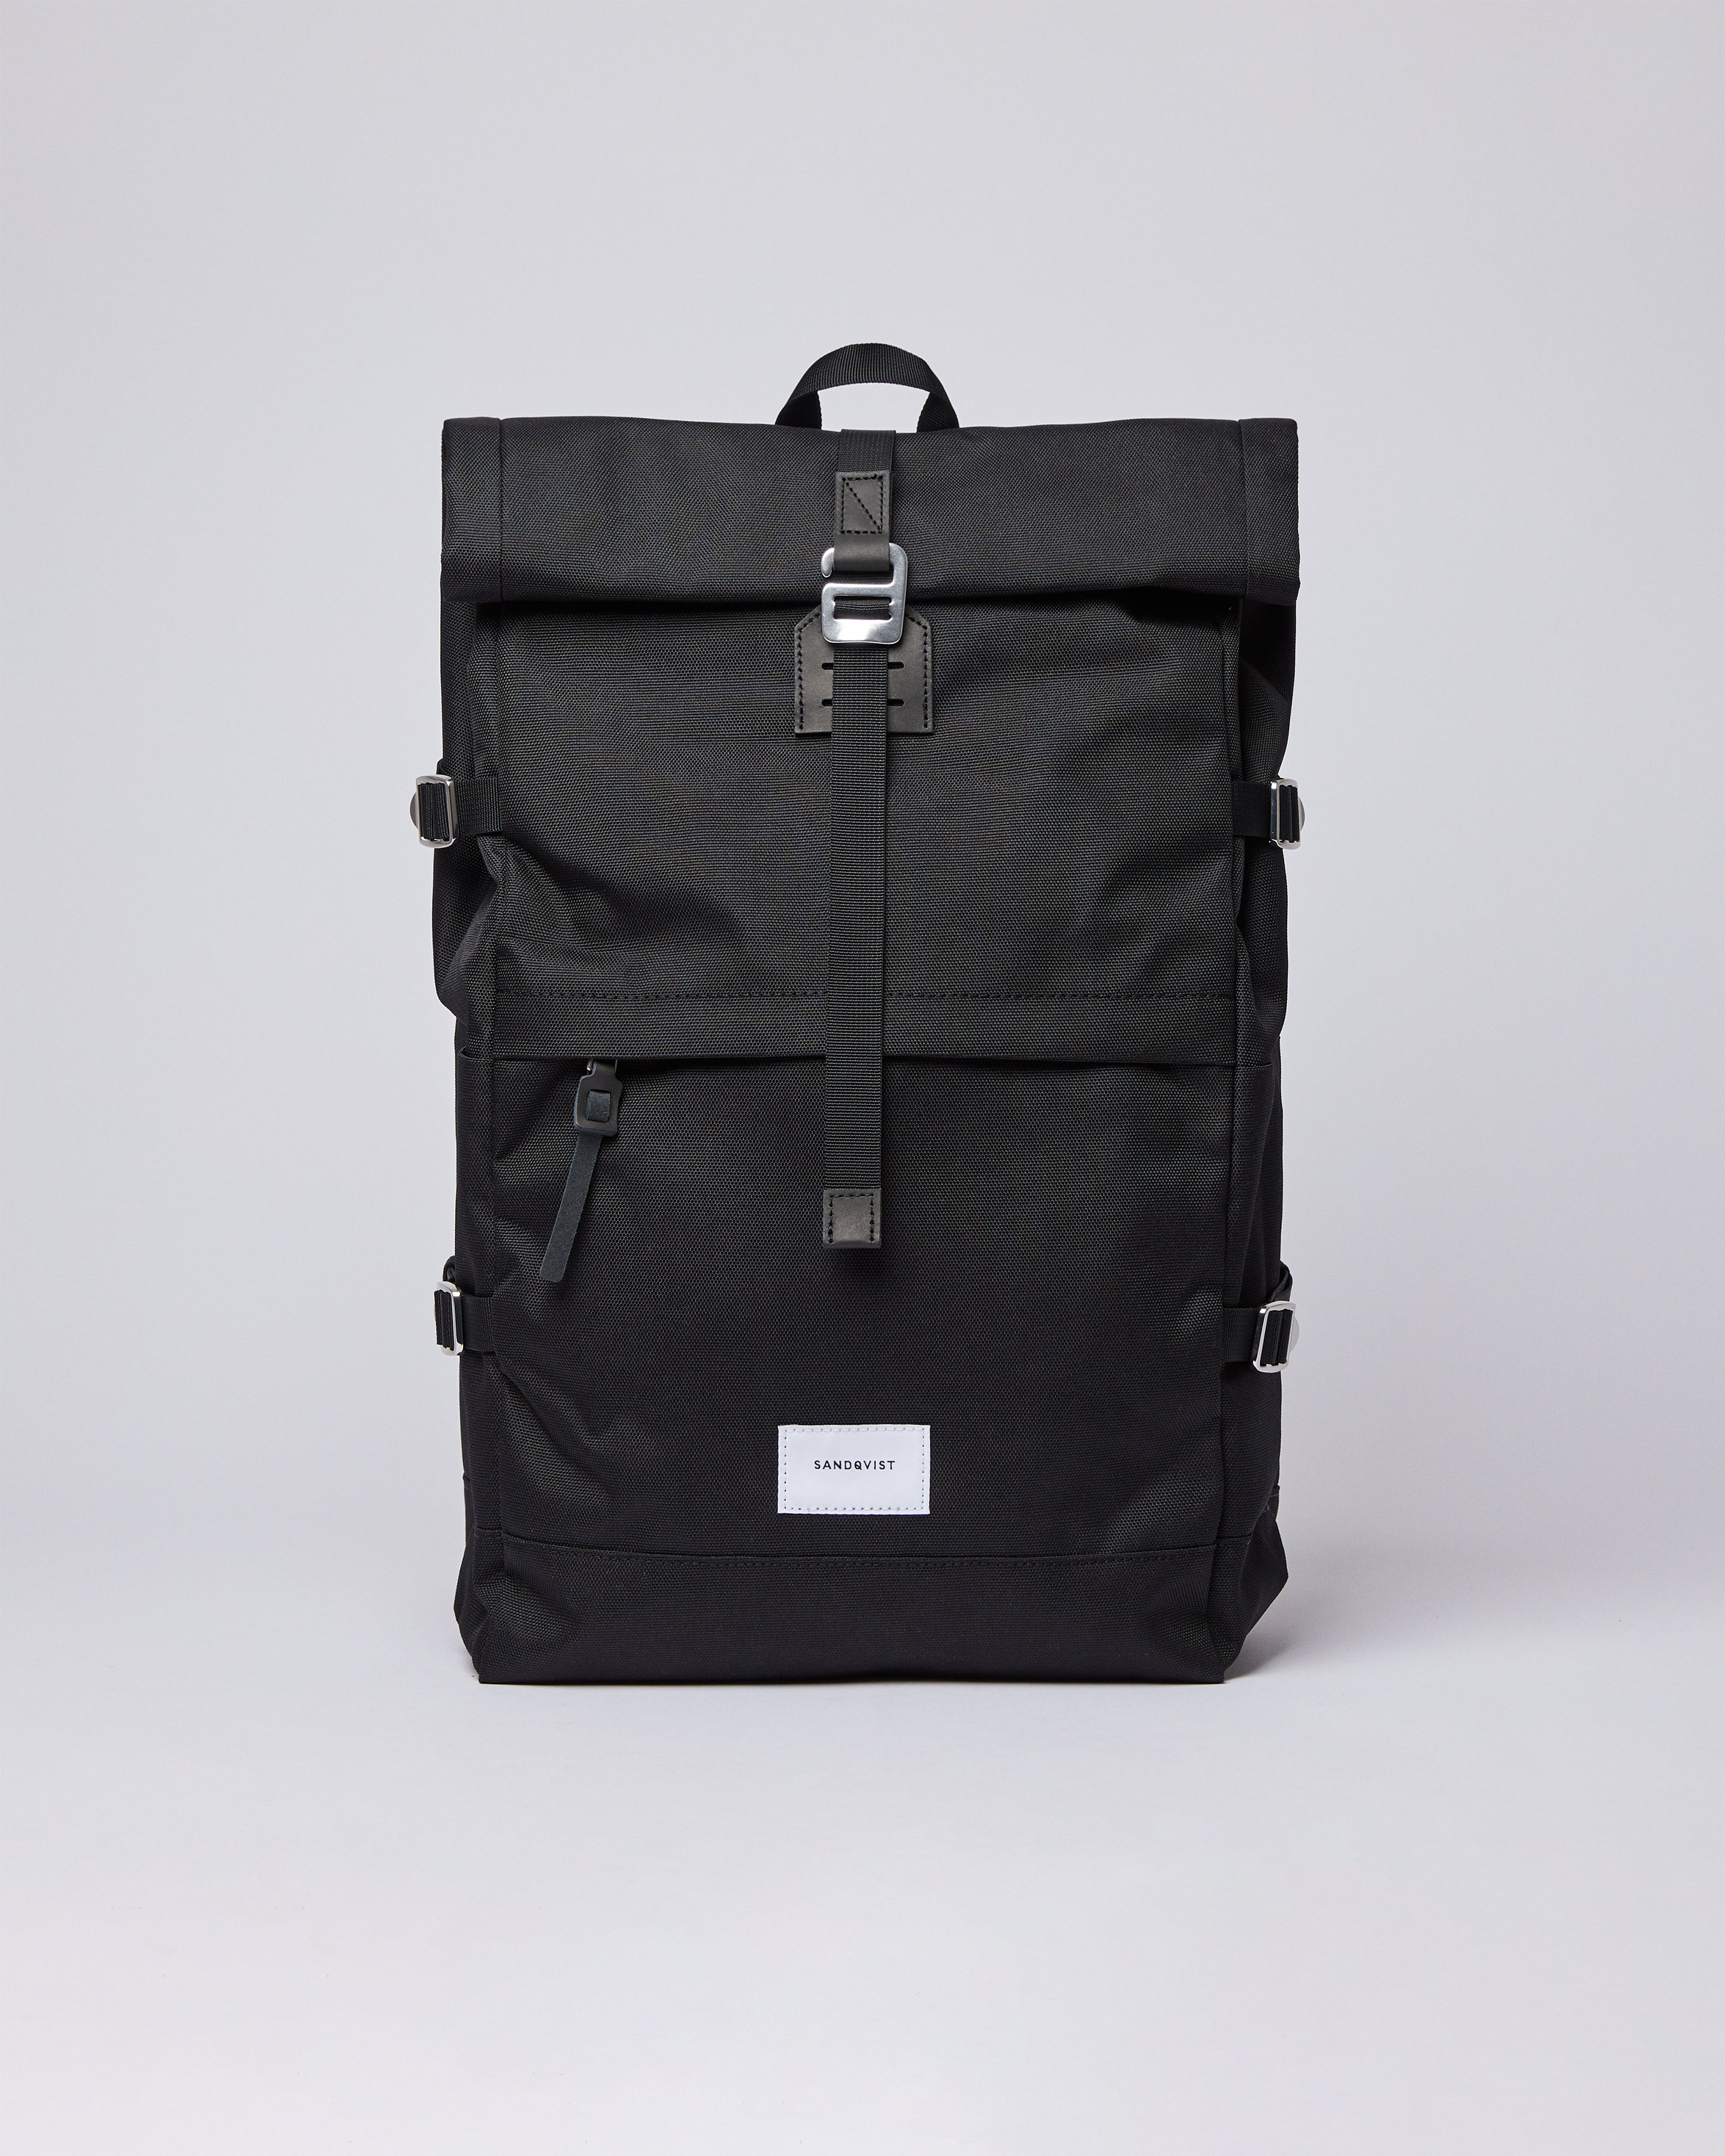 Sandqvist Bernt Backpack in Black SQA1039 Black with black webbing | Shop from eightywingold an official brand partner for Sandqvist Canada and US. 